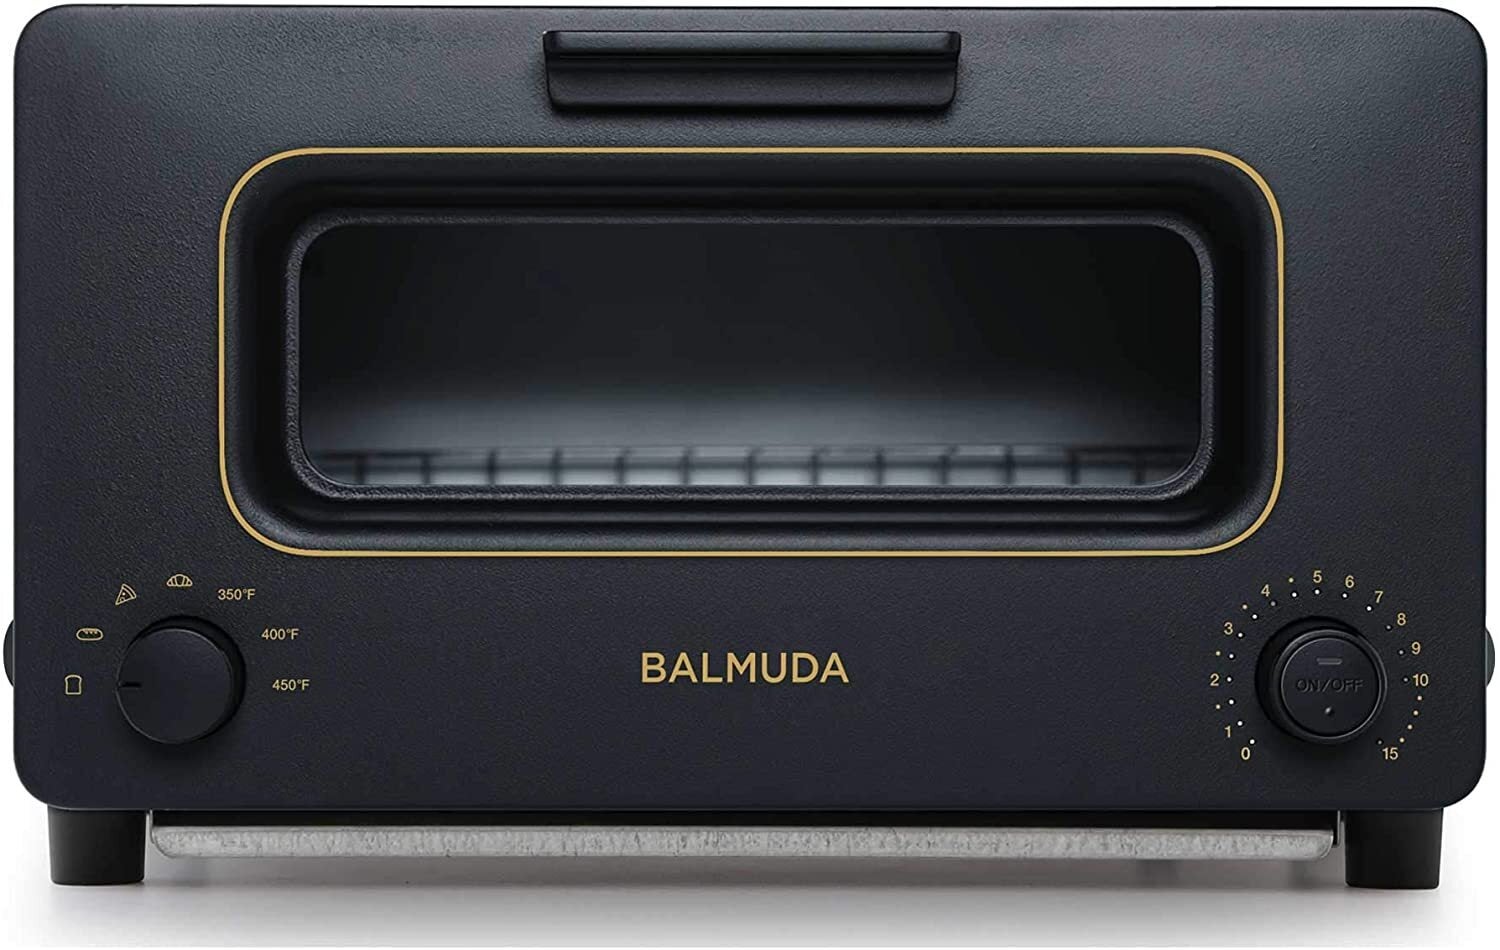 Steam toaster manufacturer Balmuda plans on offering a new Android powered smartphone as soon as November - High-end toaster company announces that it is entering the 5G Android smartphone business